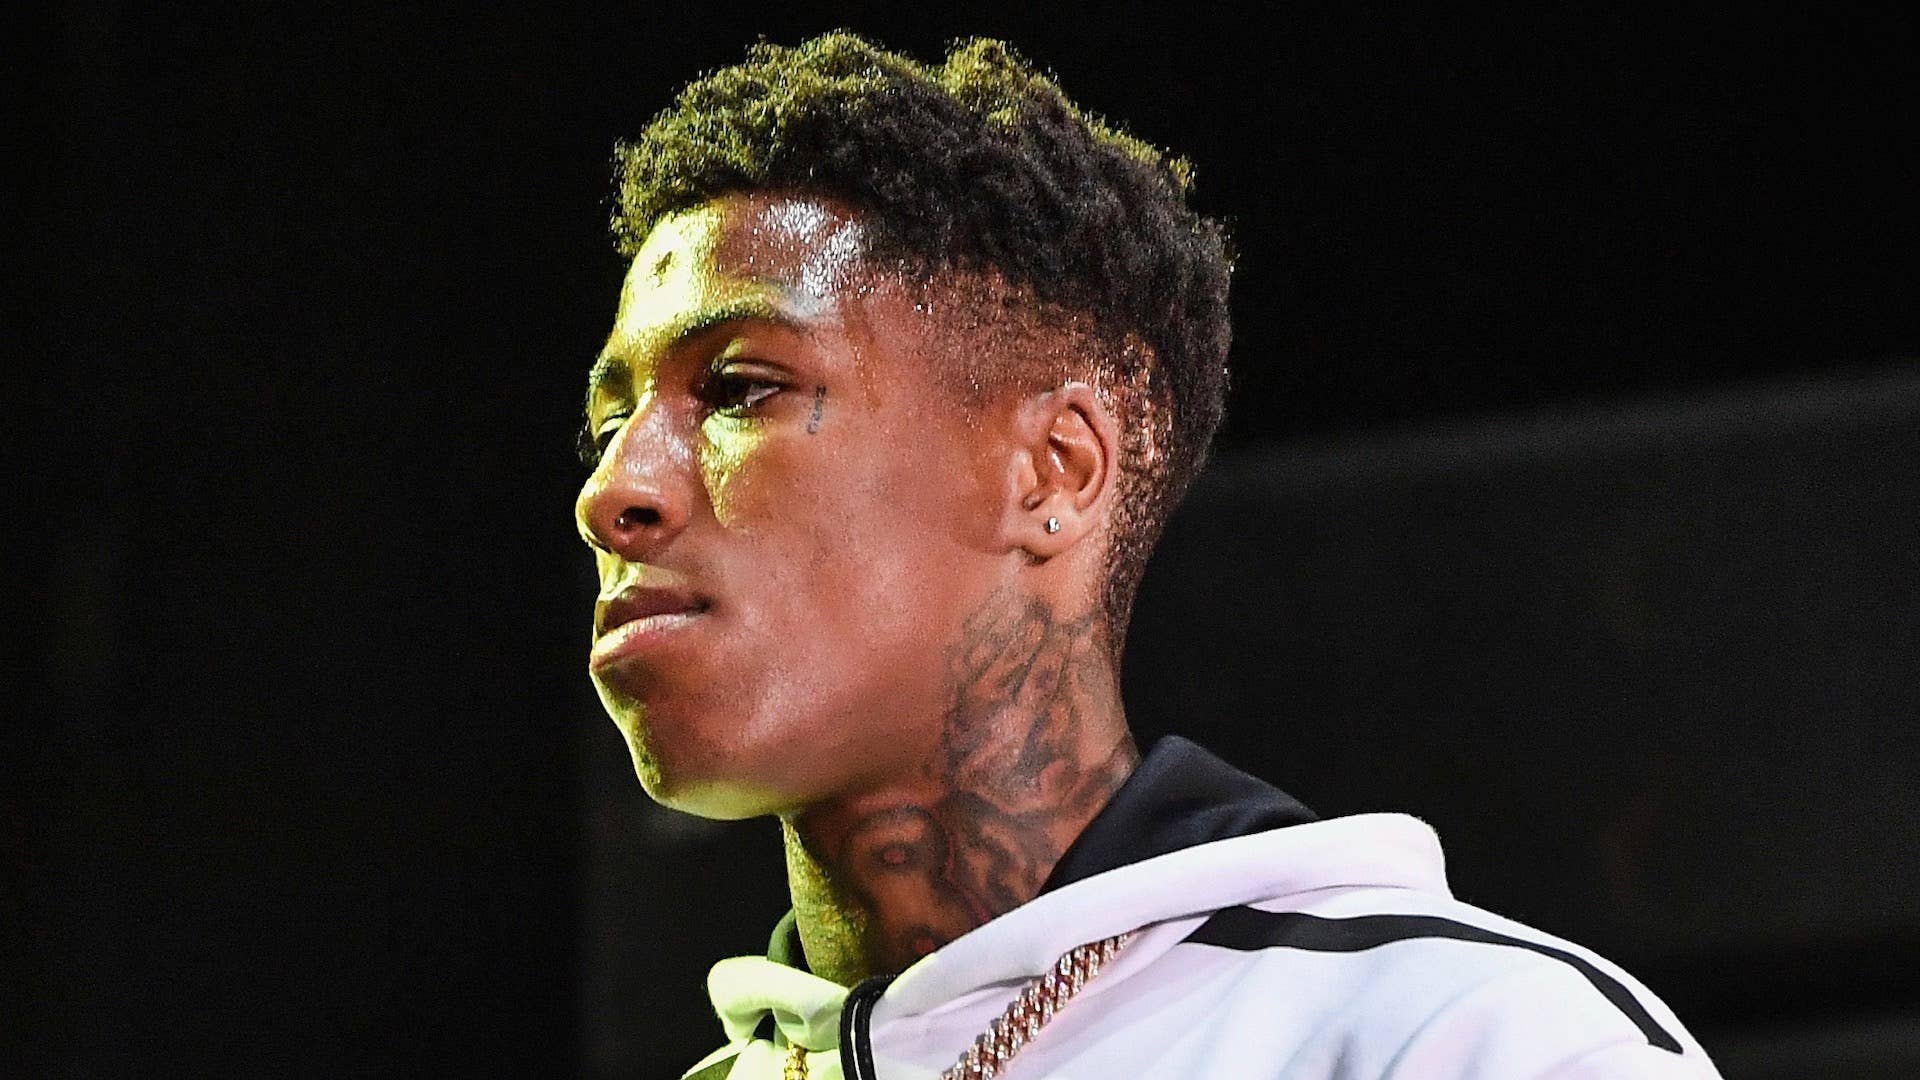 PHOTOS: Police release records, new details in rapper NBA YoungBoy's arrest  Monday night